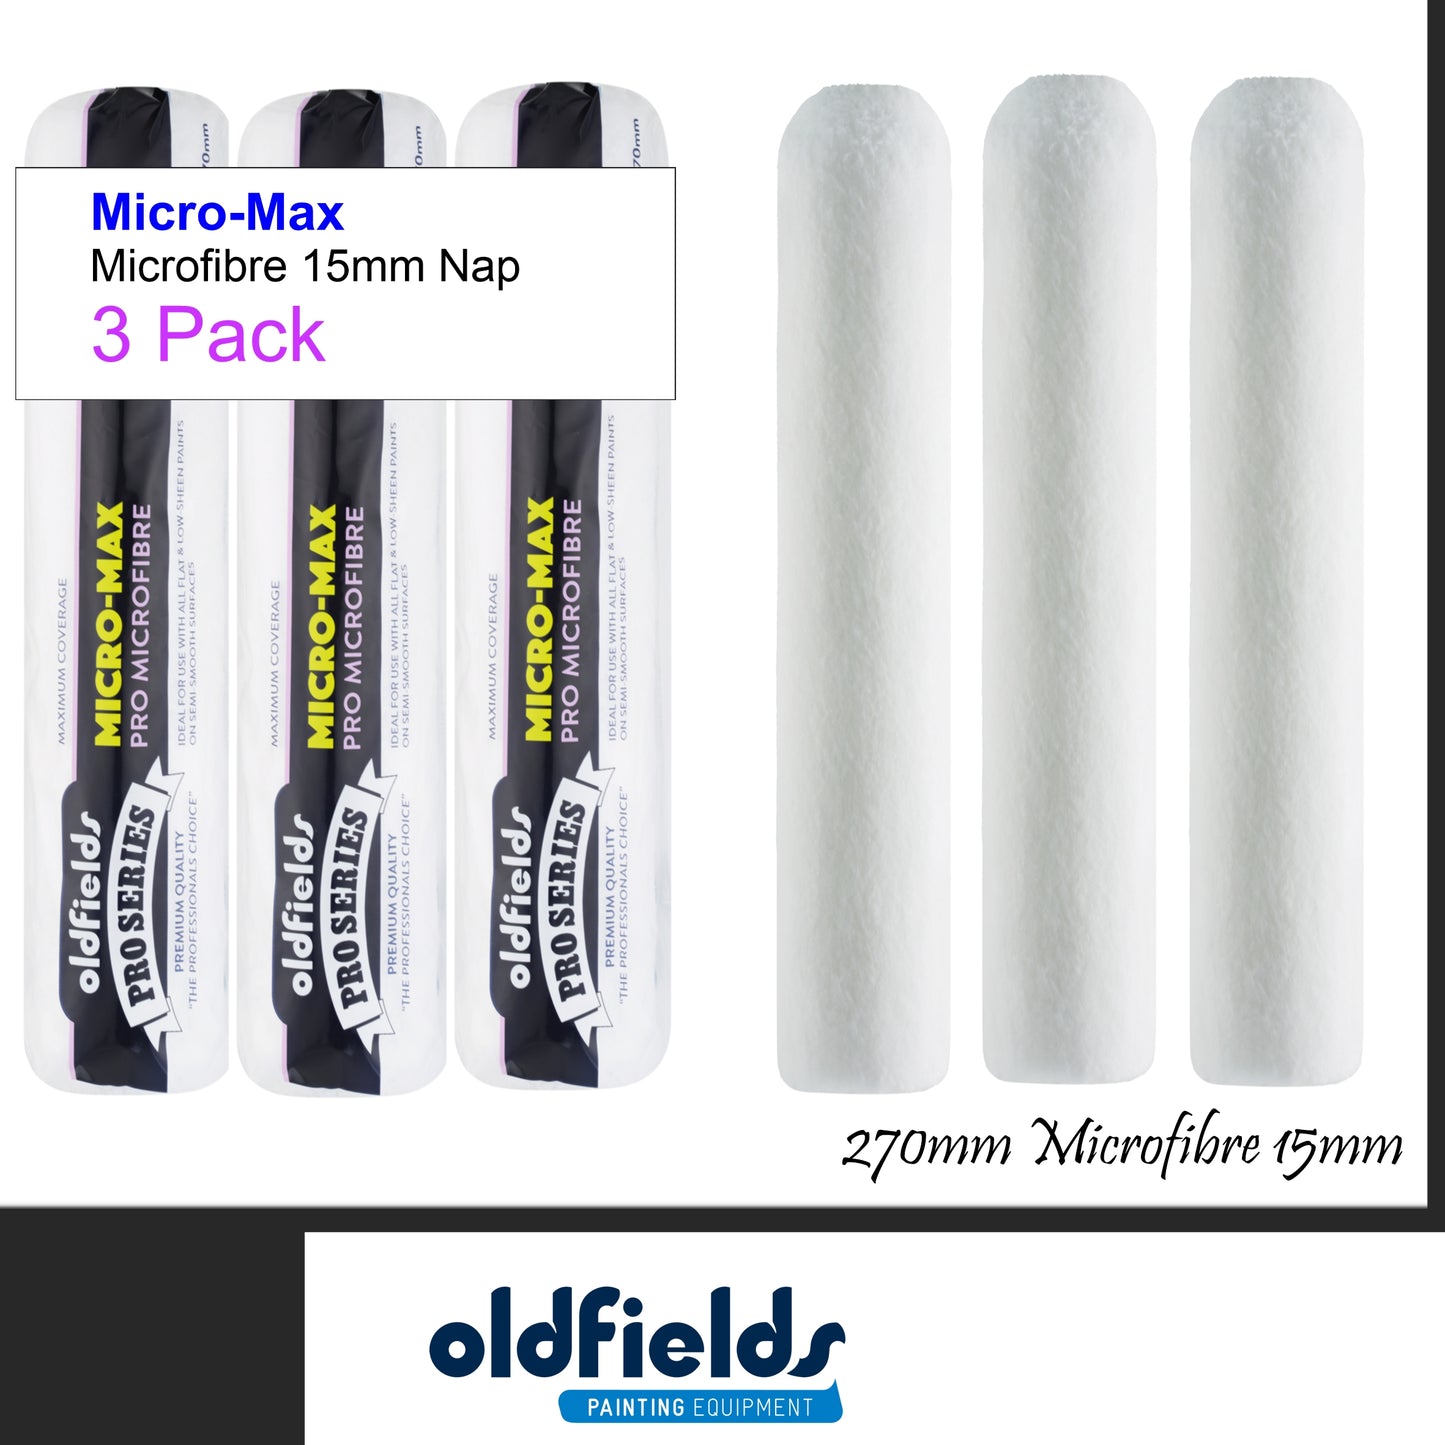 15mm Nap Pro Series Microfibre Paint Roller Sleeves from Oldfields